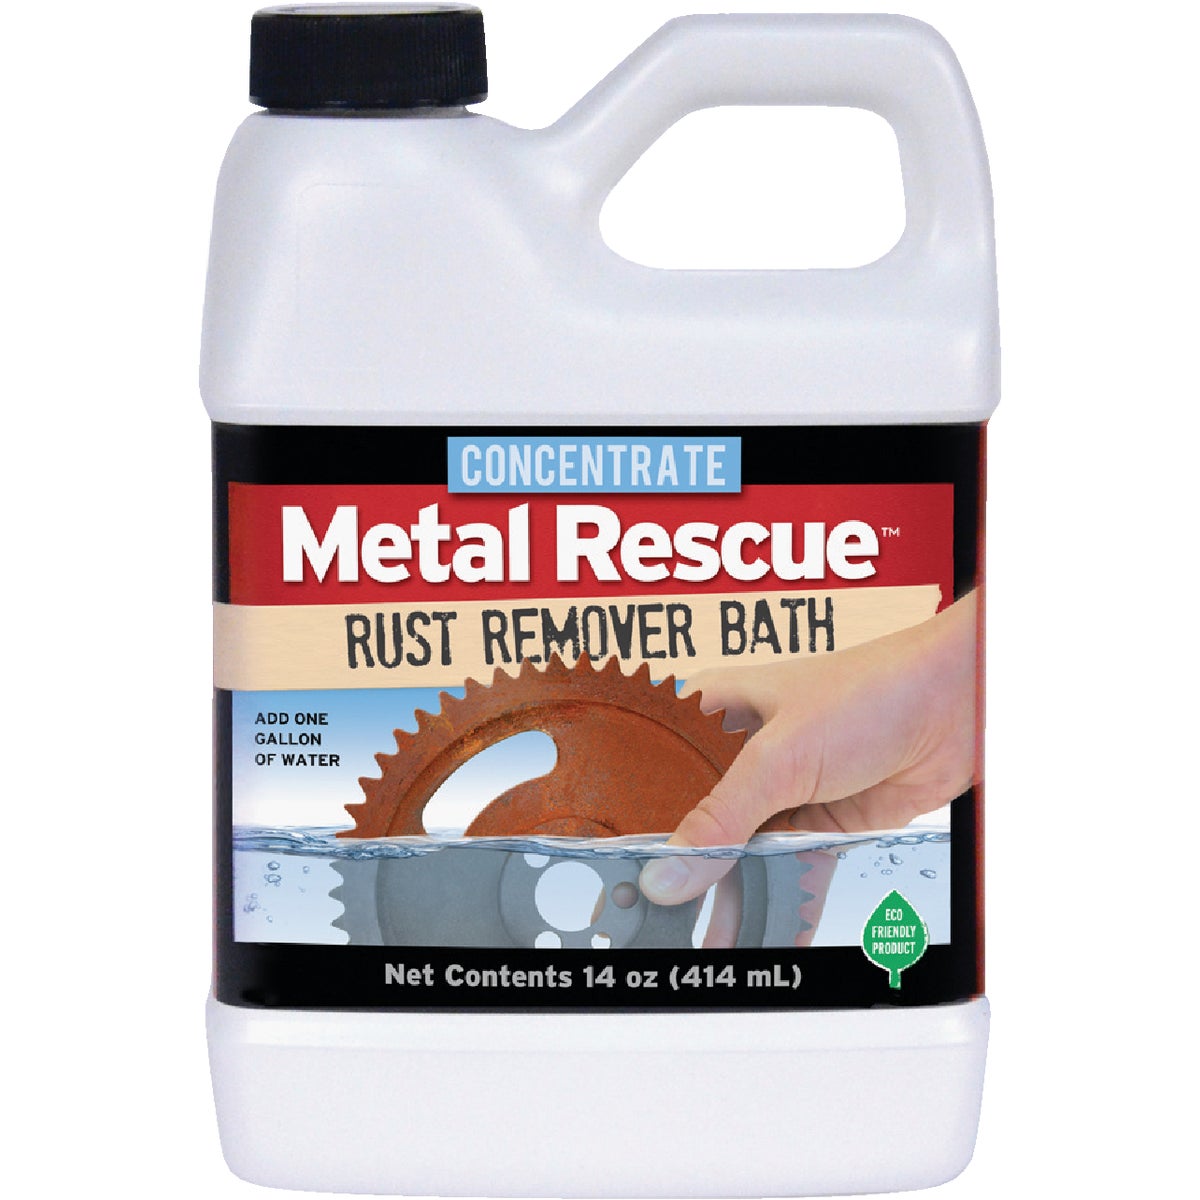 Item 771911, Metal Rescue Rust Remover Bath is your clean, safe and easy solution to 